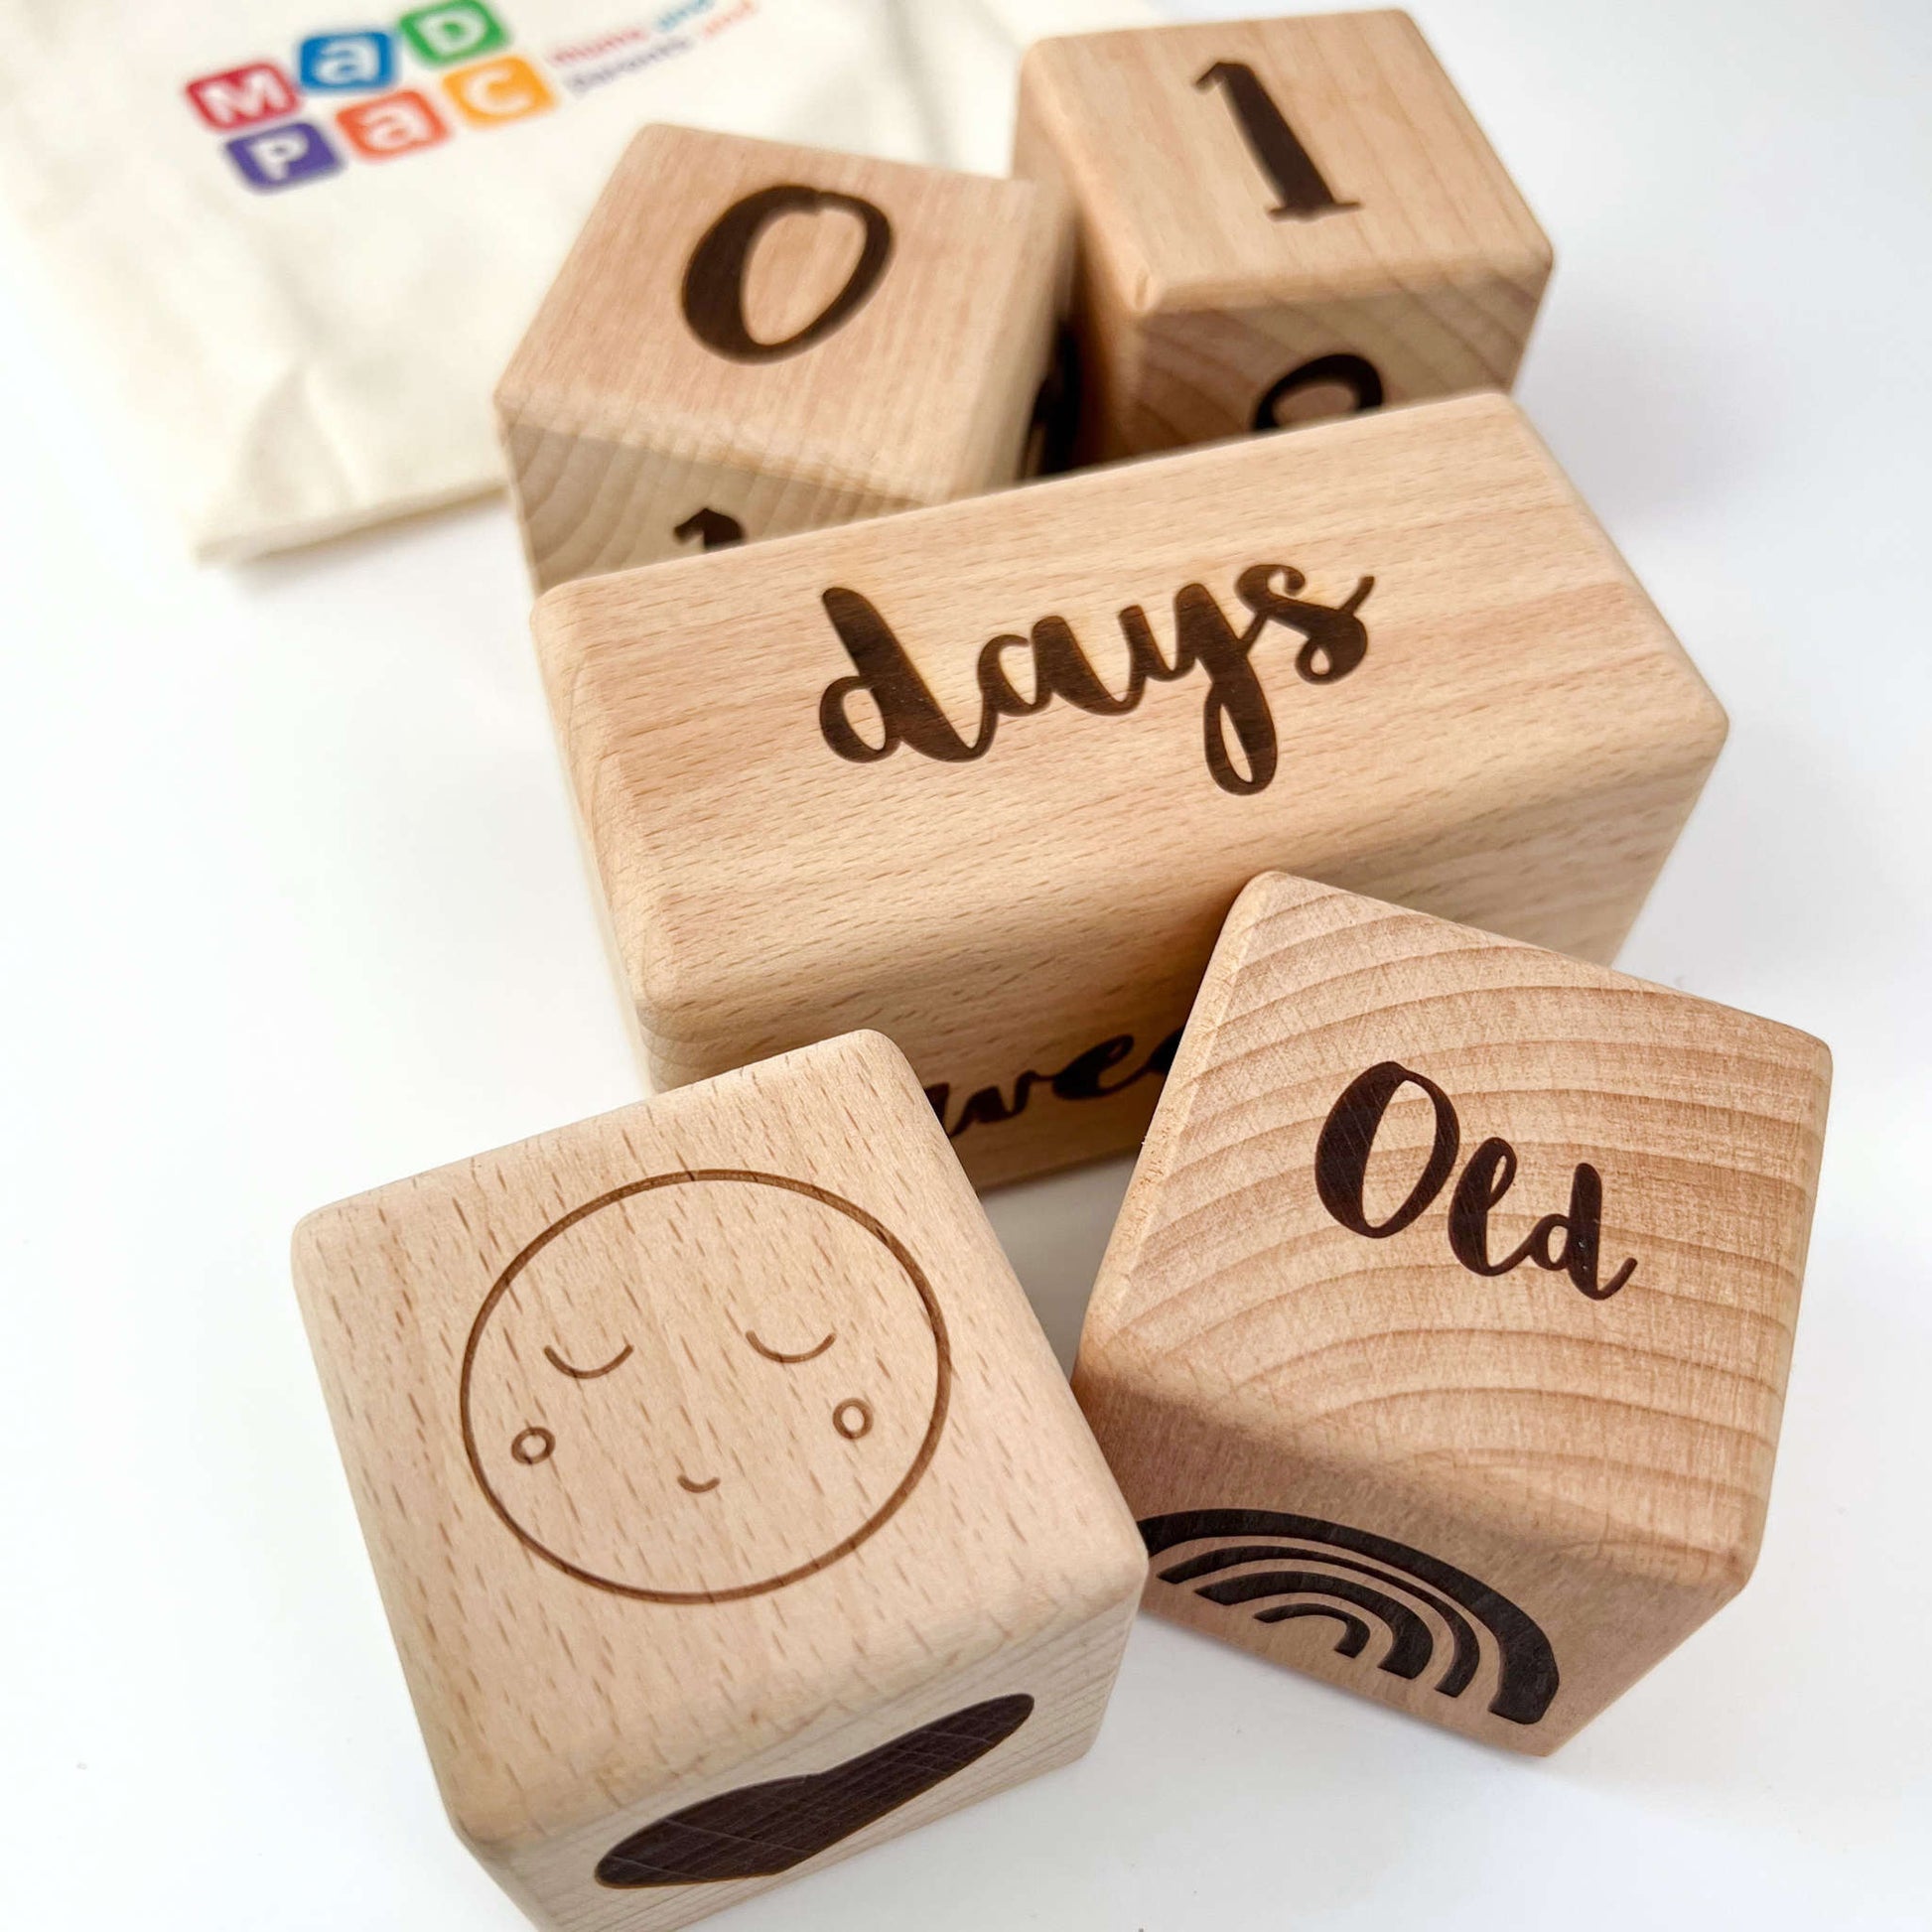 Adorable wooden blocks with rainbows, stars, and moons. Perfect for play and charming photo props